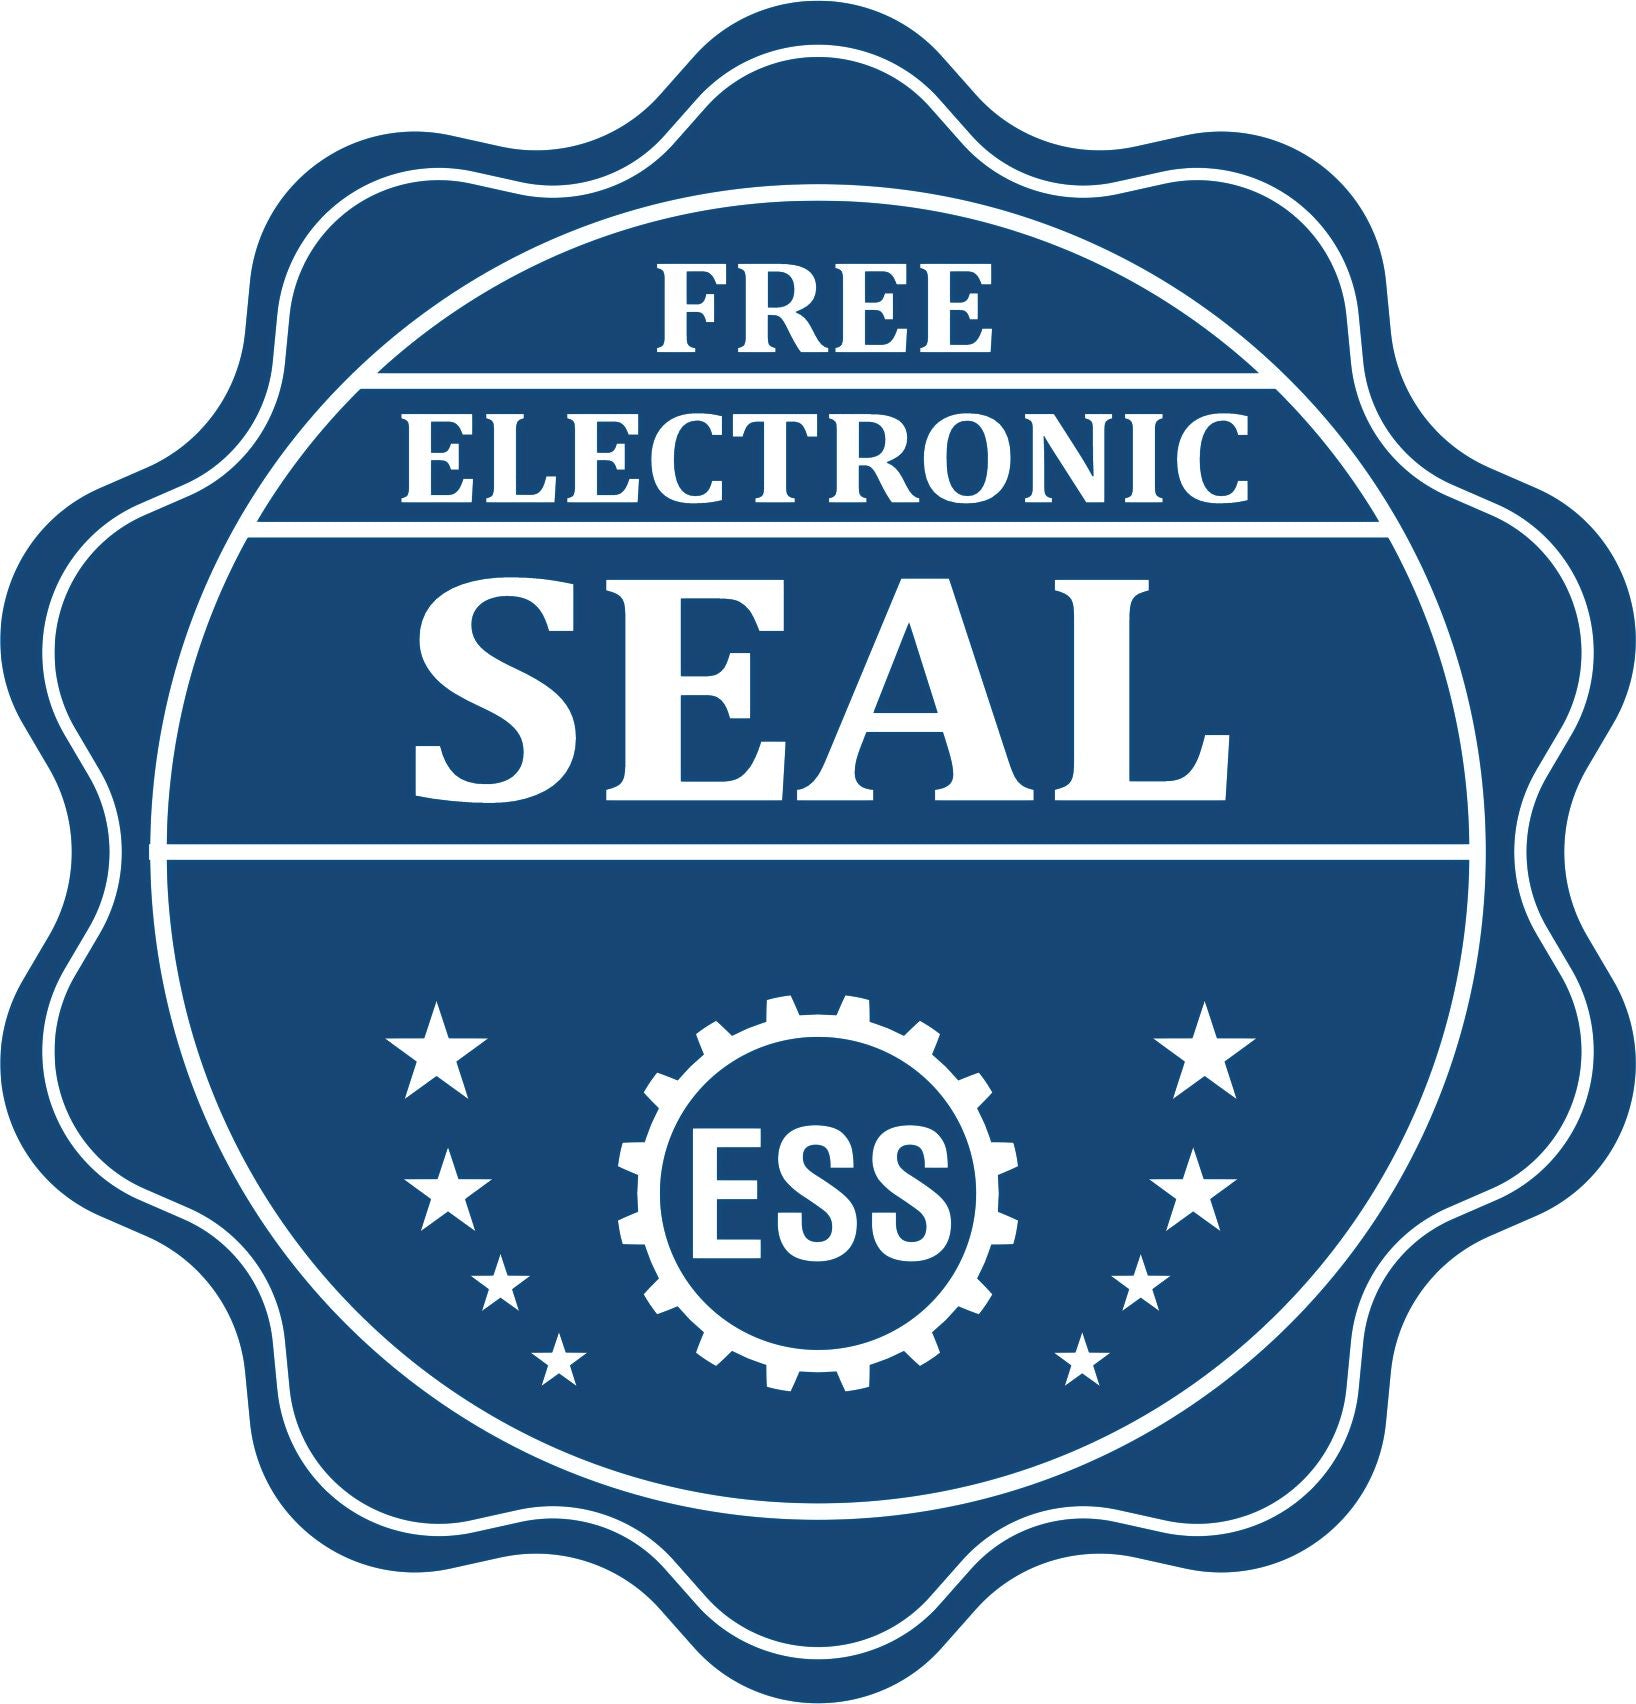 A badge showing a free electronic seal for the Slim Pre-Inked Missouri Professional Engineer Seal Stamp with stars and the ESS gear on the emblem.